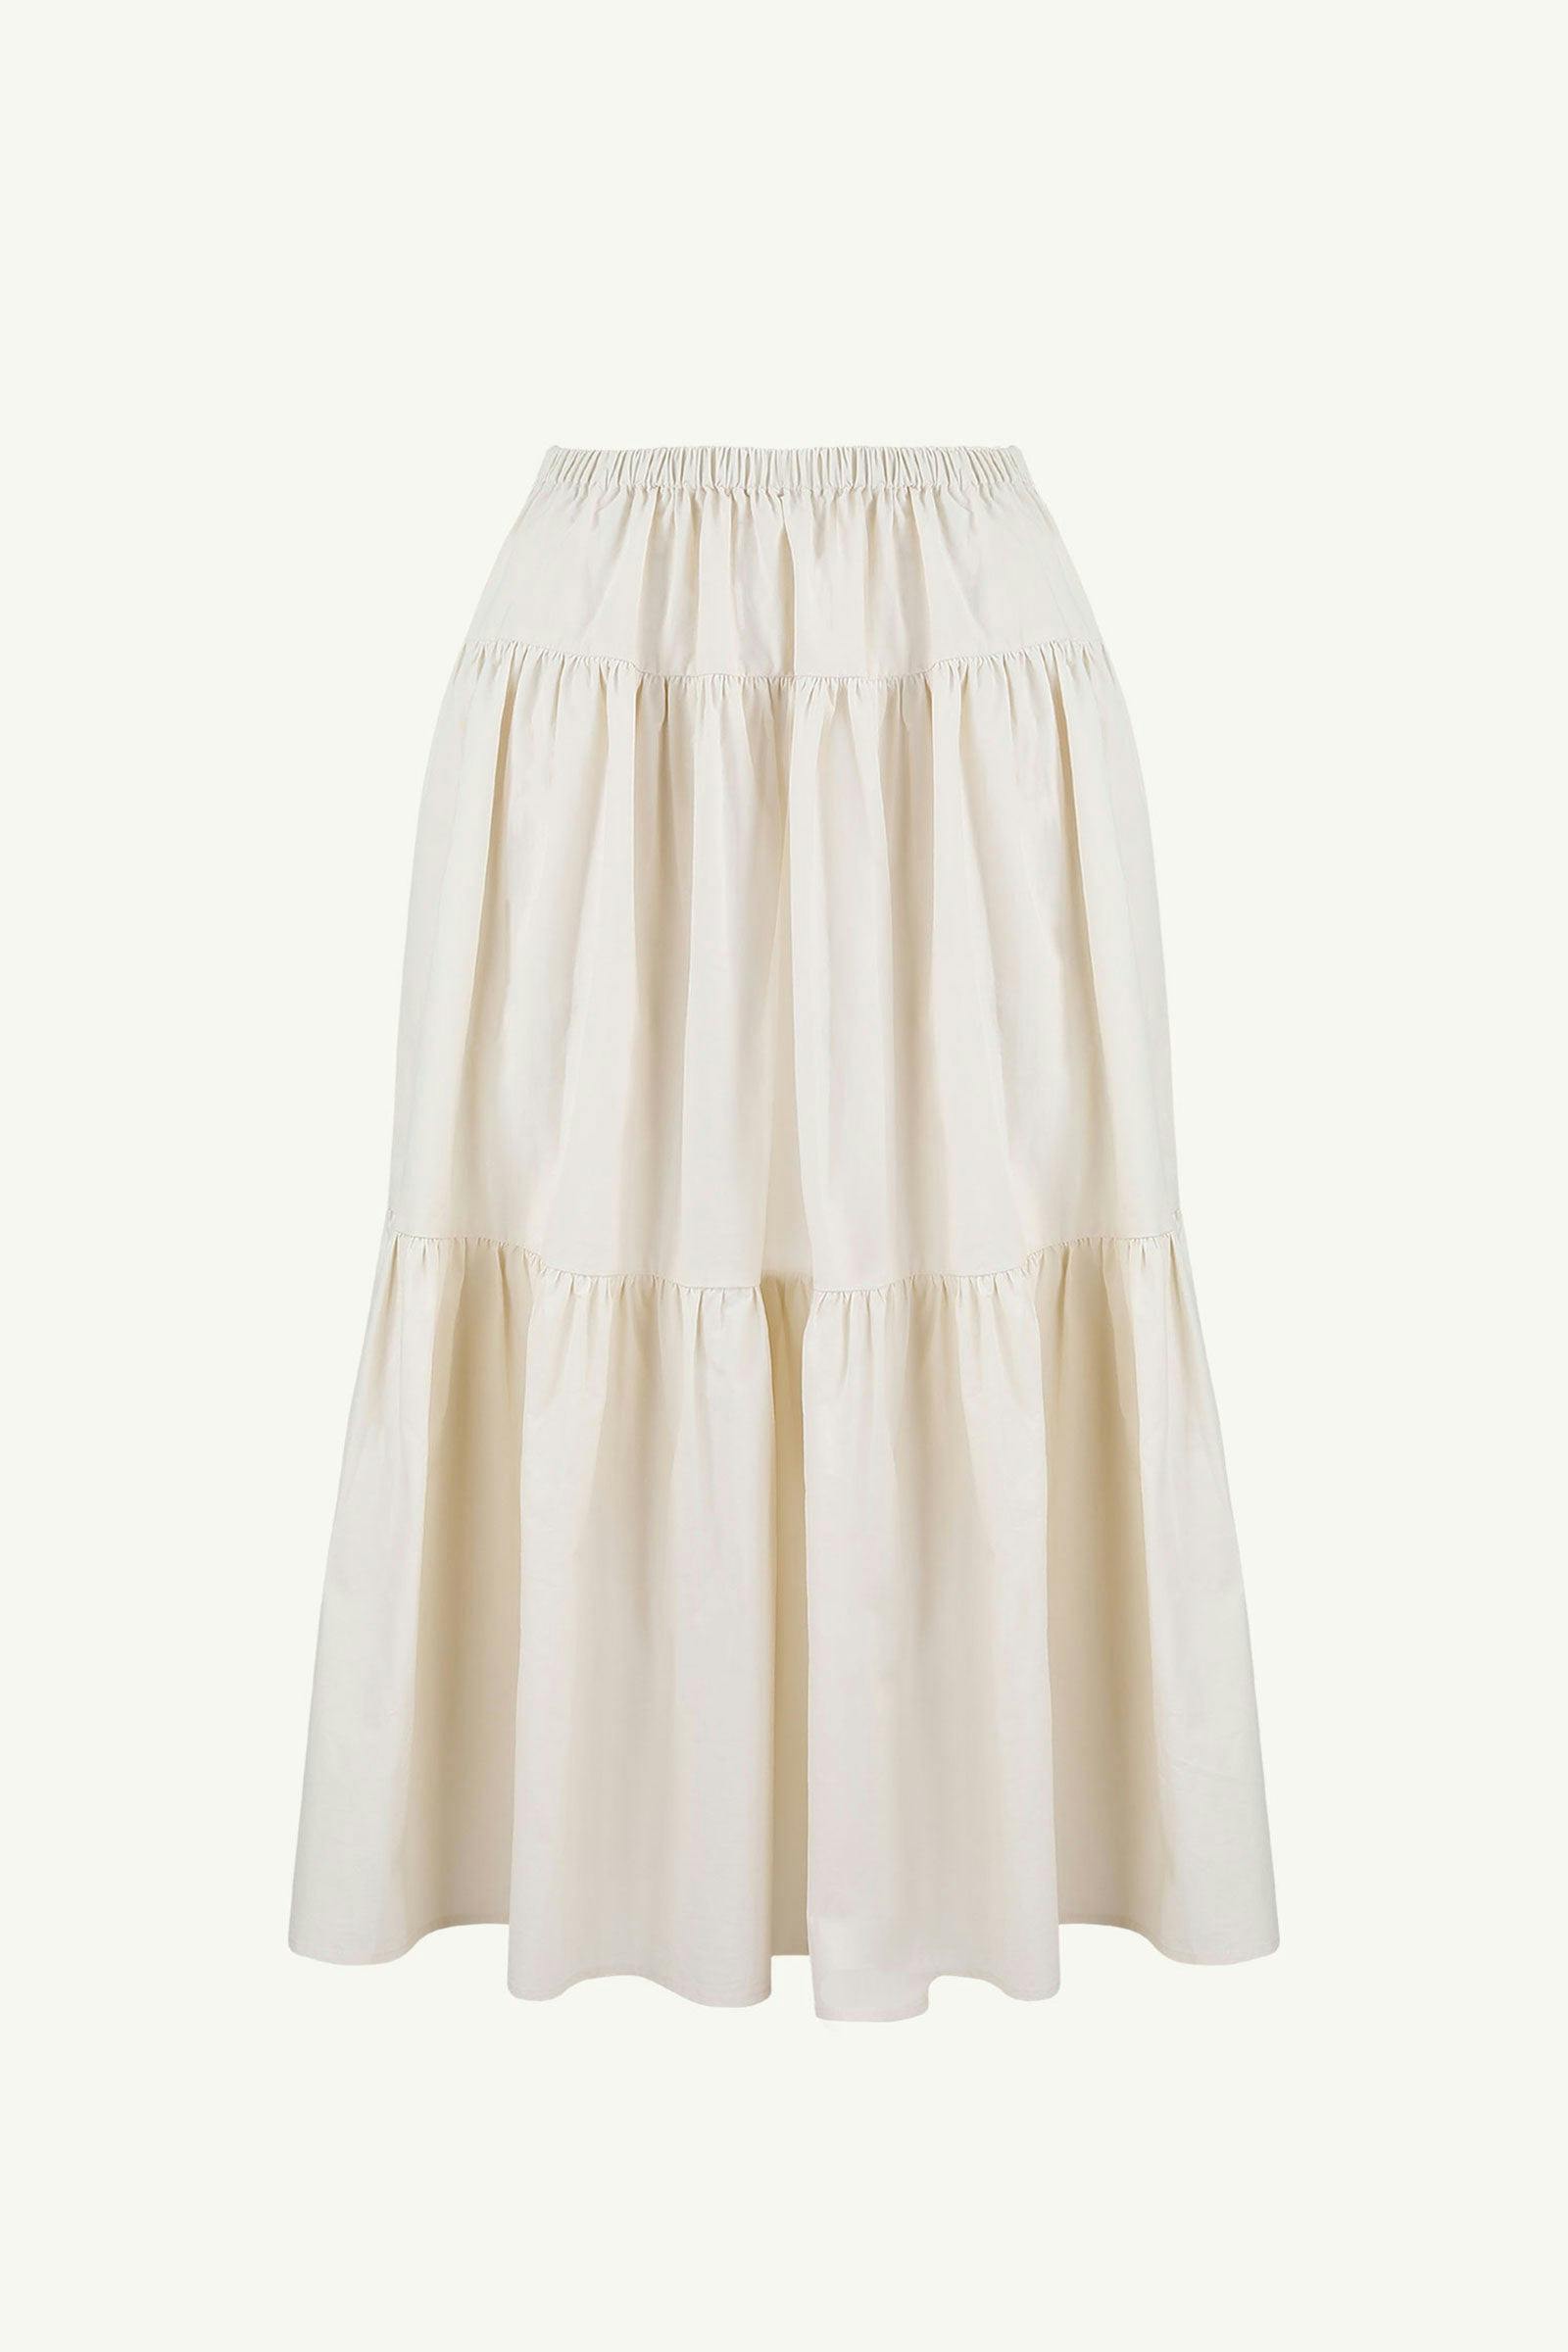 Teacake Skirt | Tiered Flare Skirt in Cream Colour | Something to Hold